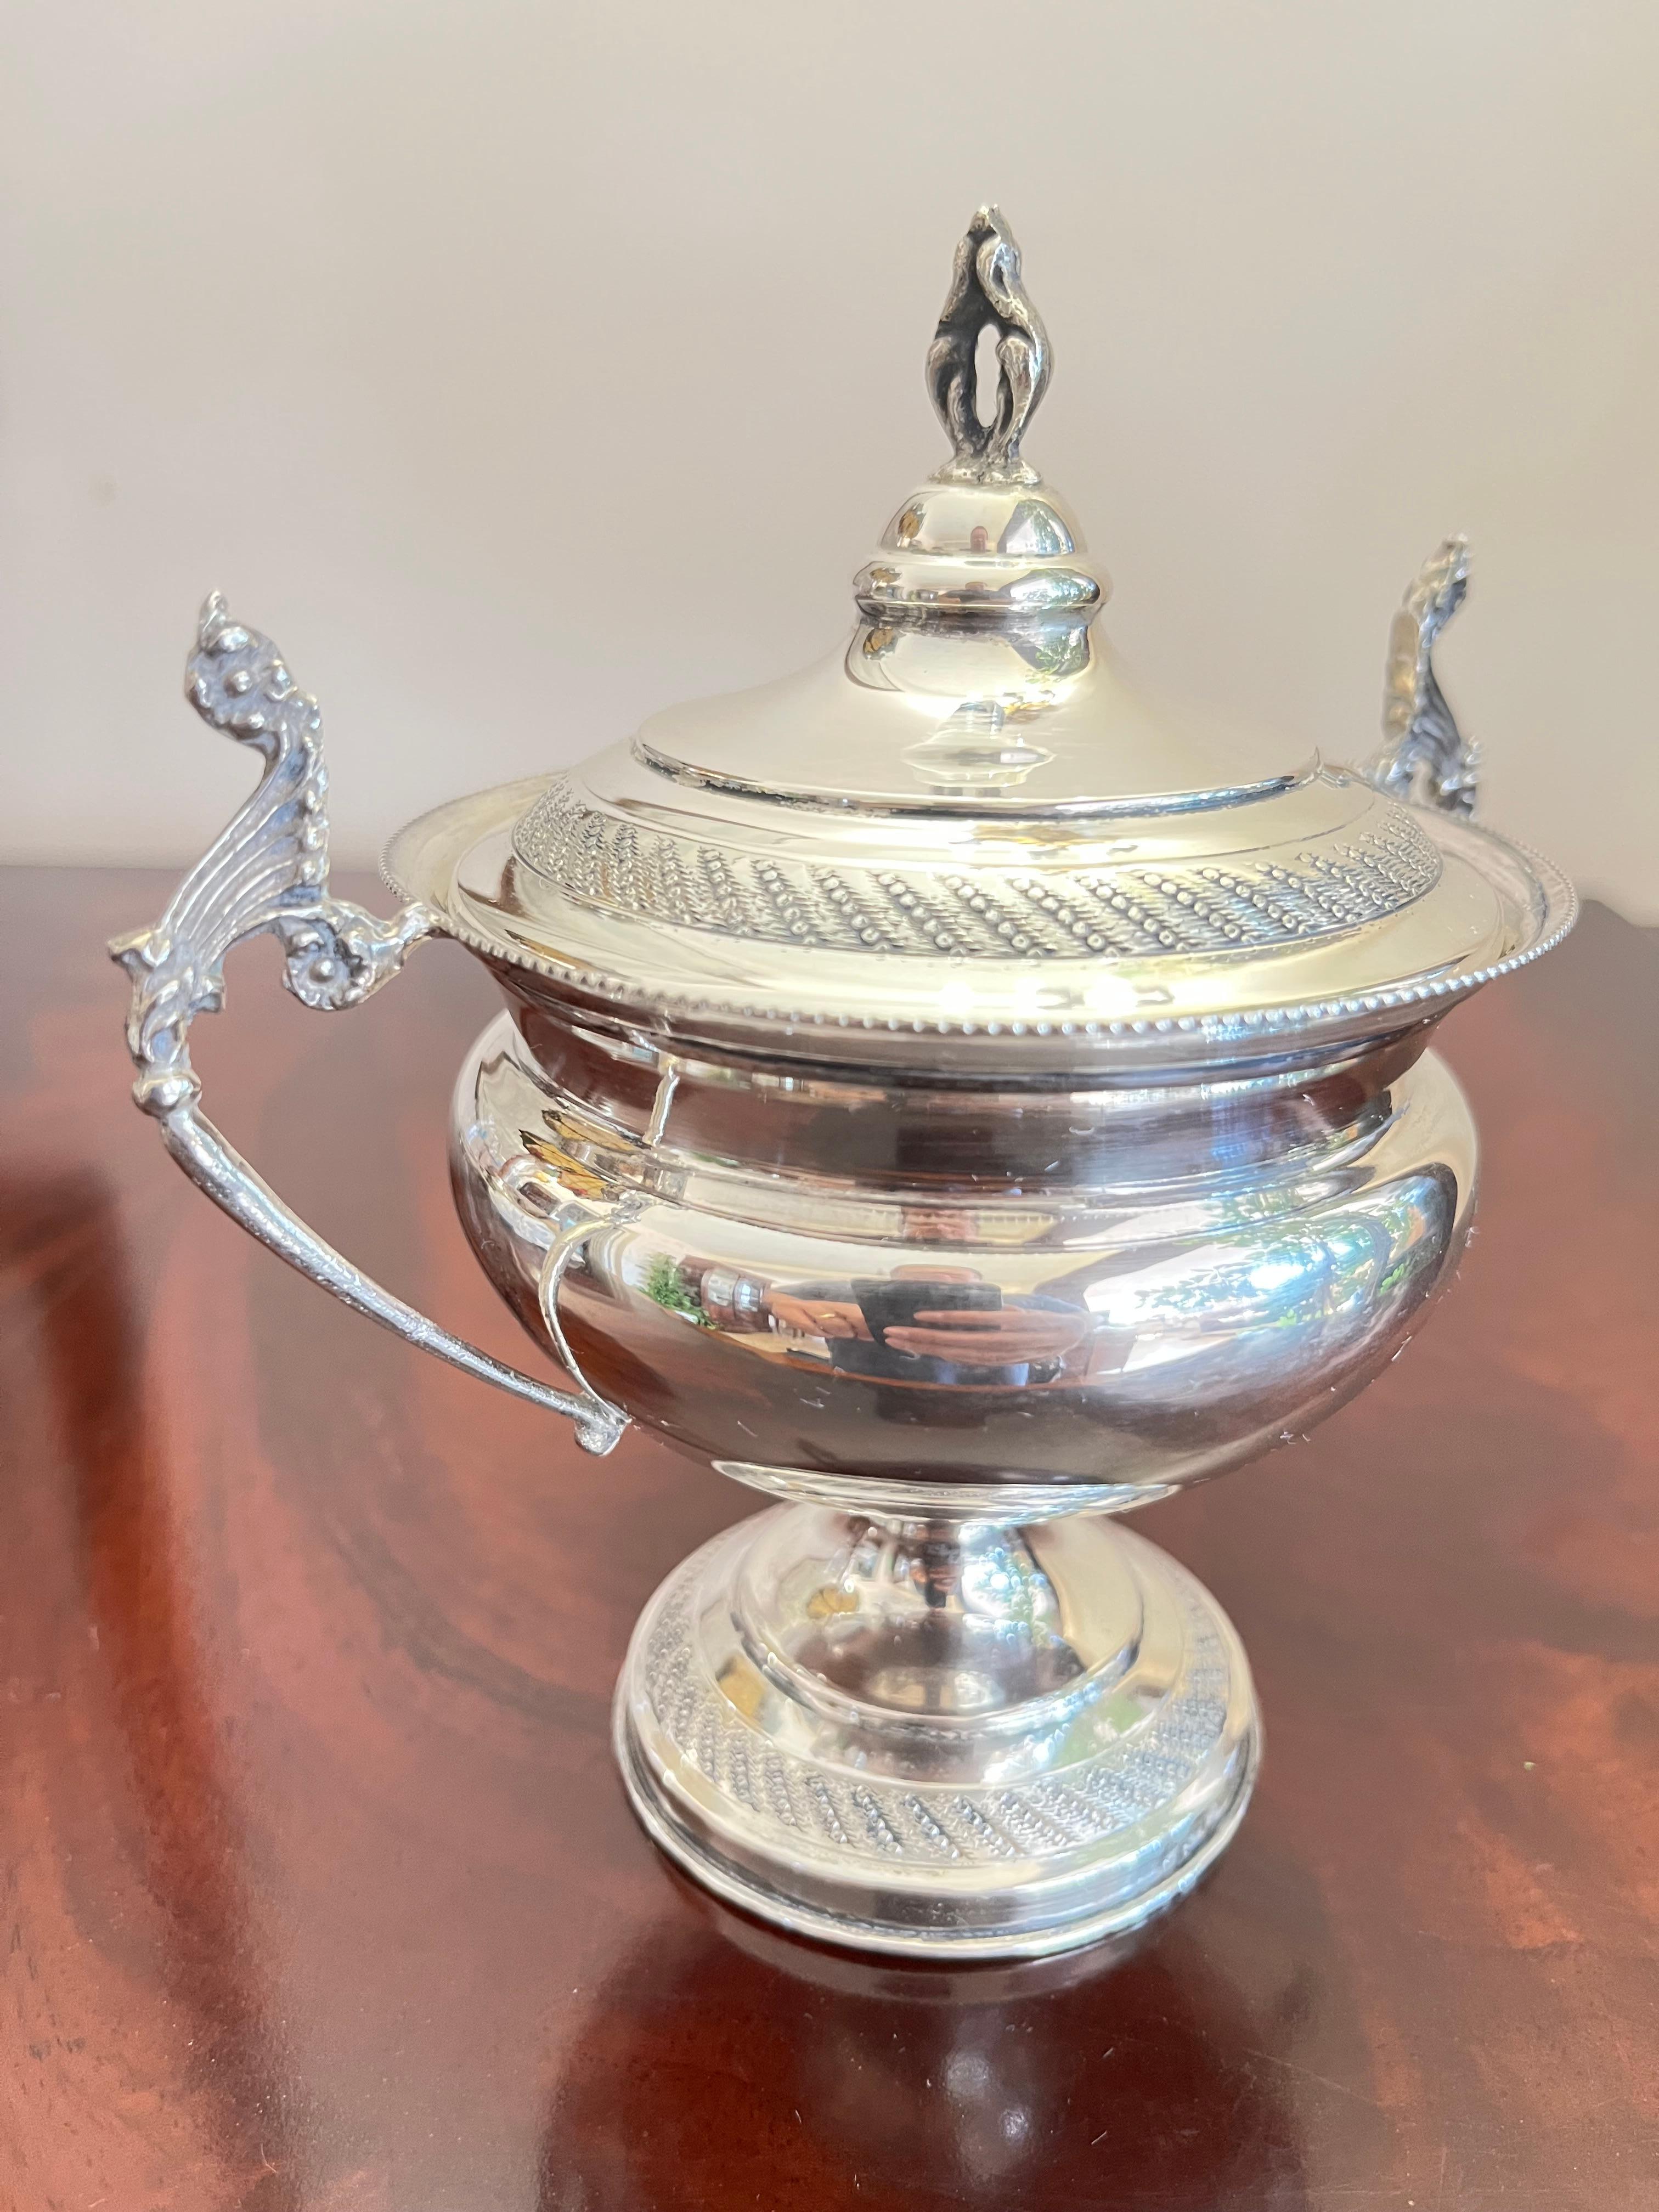 Empire style sugar bowl in 800 silver, Italy, 1950s
It belonged to my maternal great-grandparents and is in excellent condition. Very small signs of the time. Gr. 166,00.